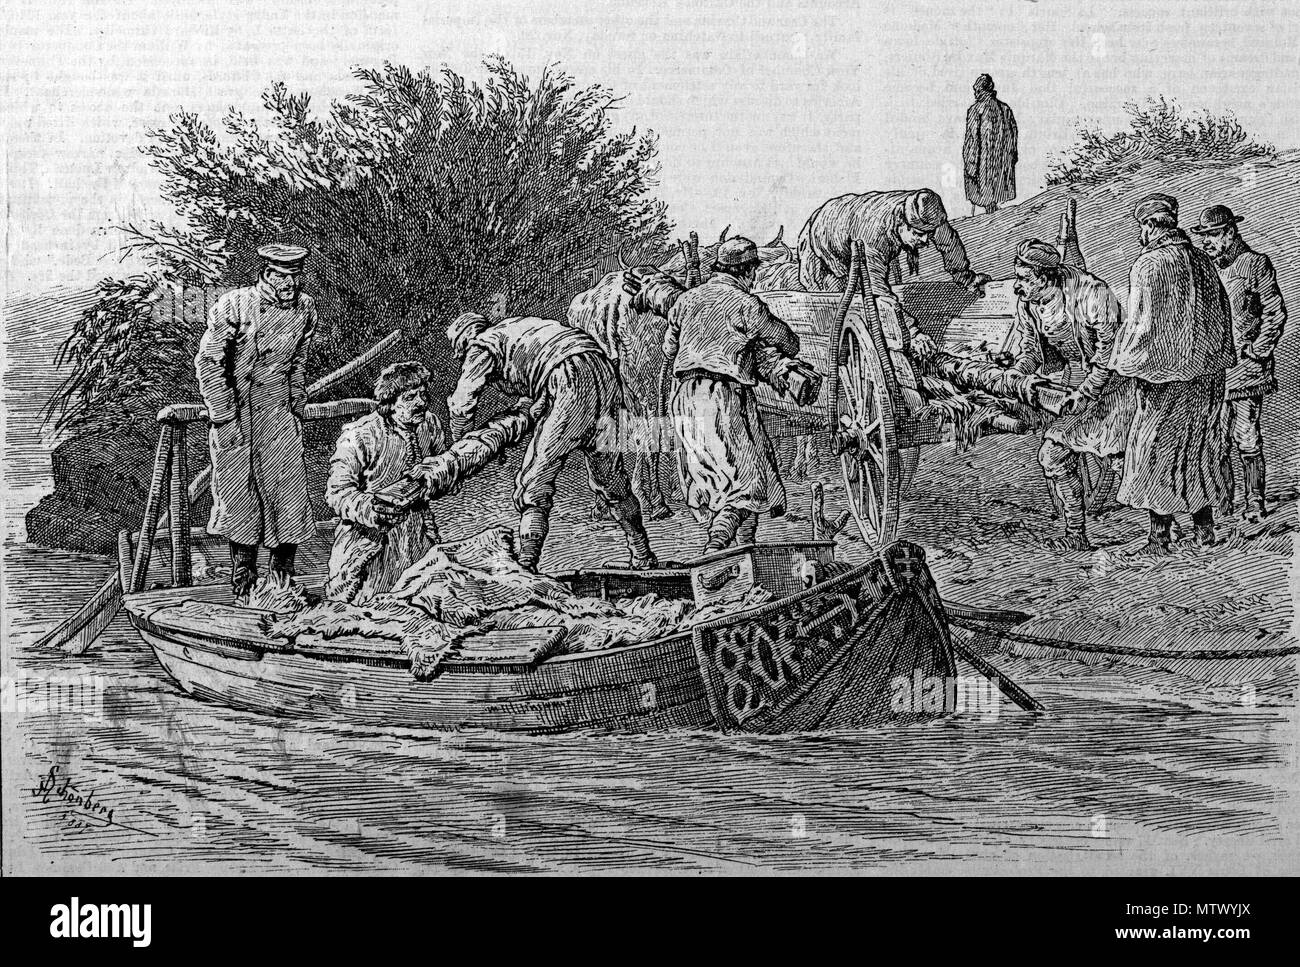 . Roumanian frontier guards searching a boat on the Danube for contraband Russian muskets . 26 November 1887. M. Lachmann 529 Roumanian frontier guards searching a boat on the Danube for contraband Russian muskets Stock Photo